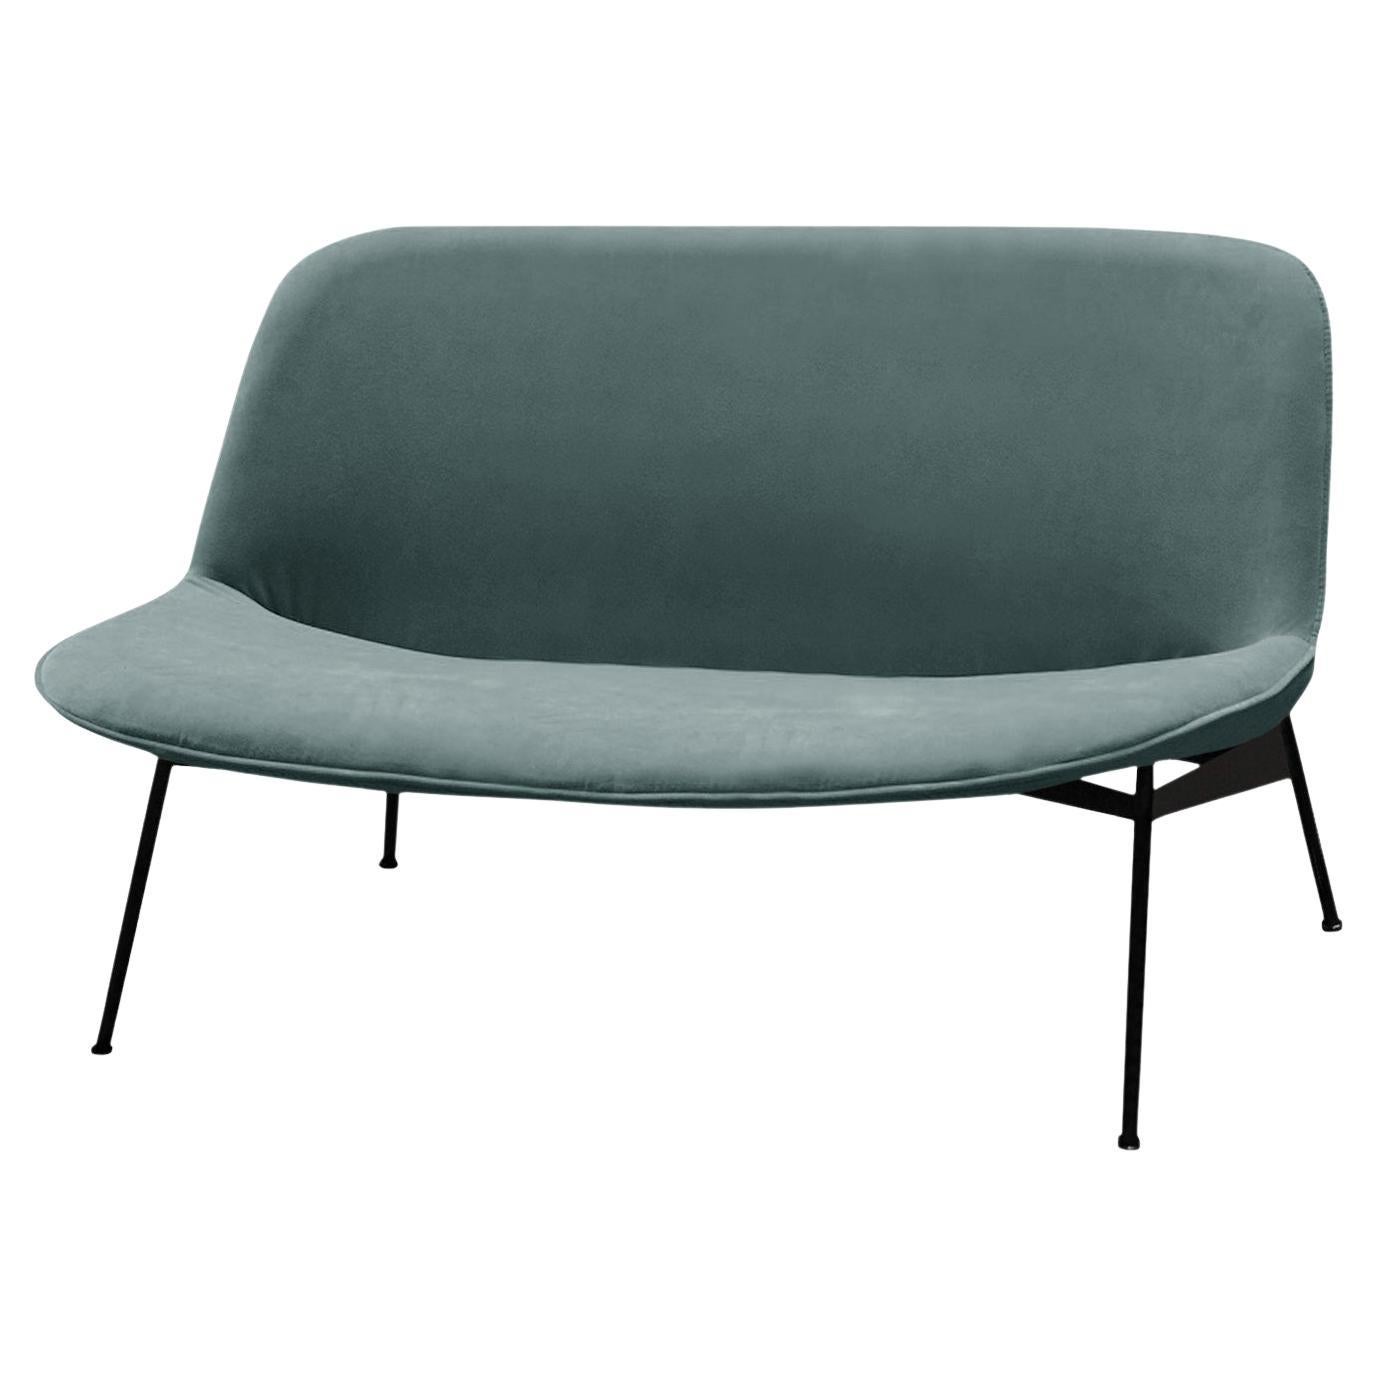 Chiado Sofa, Large with Teal and Black